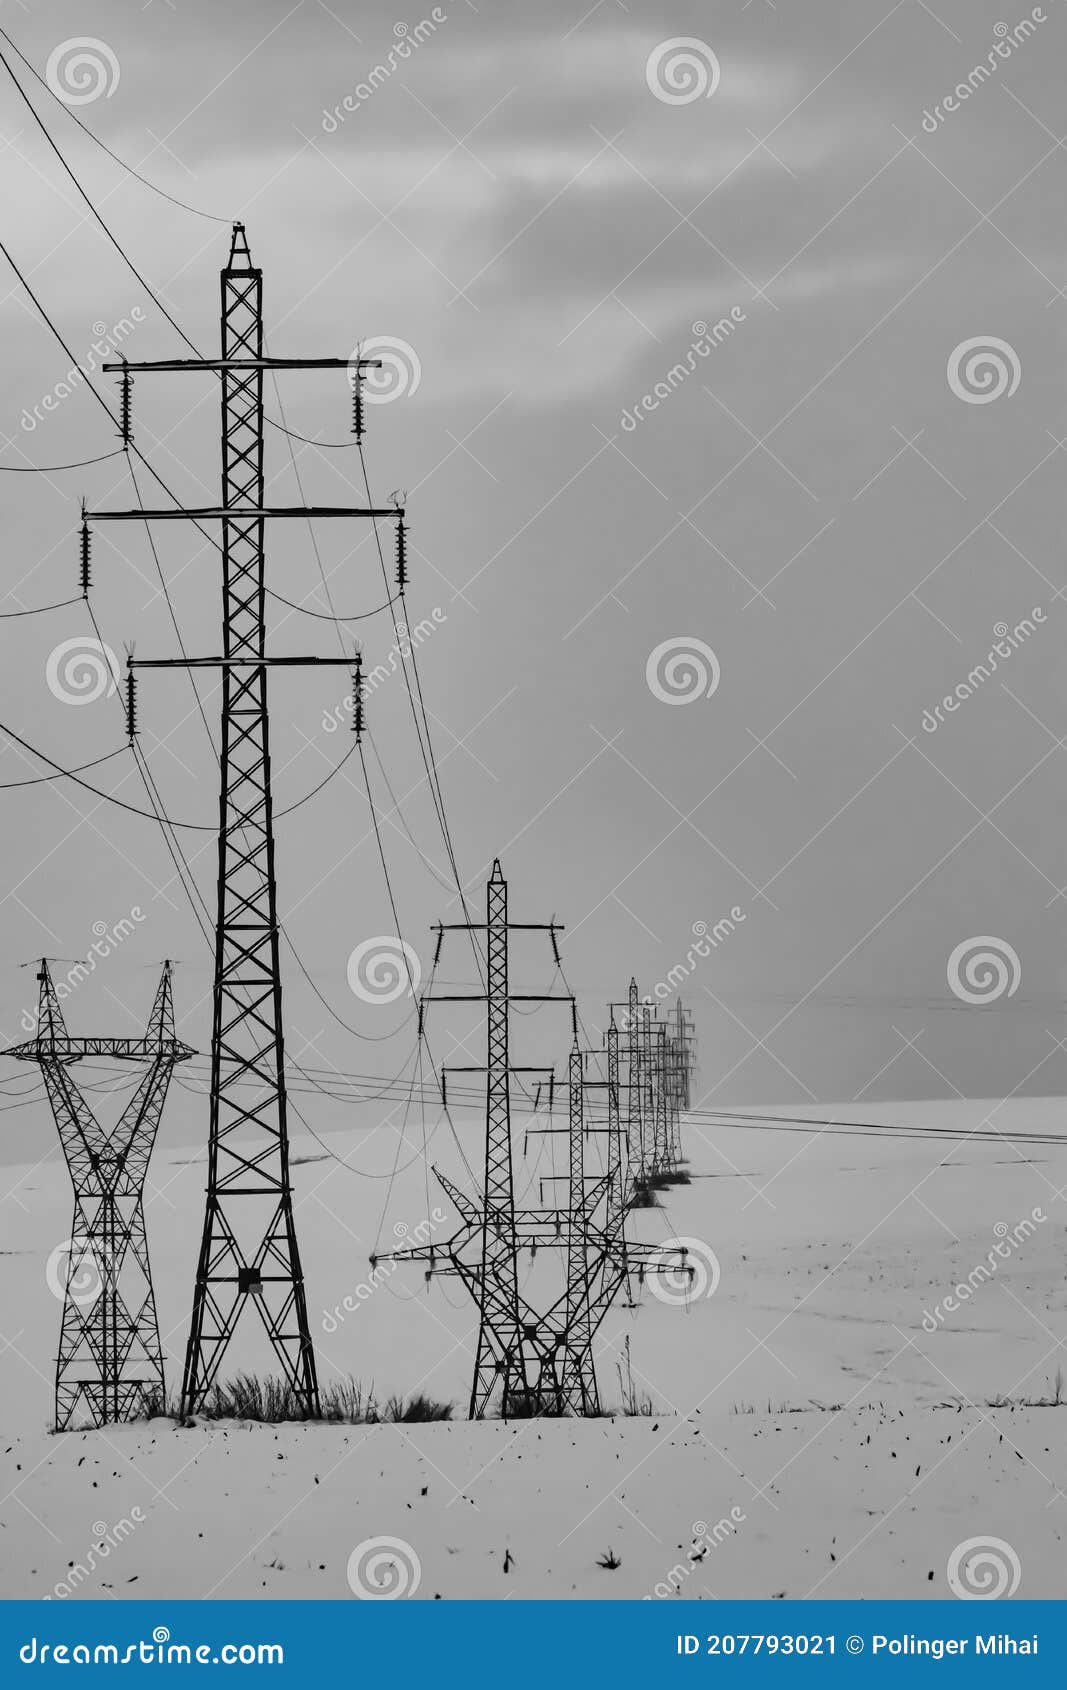 electric transmision power line and wire